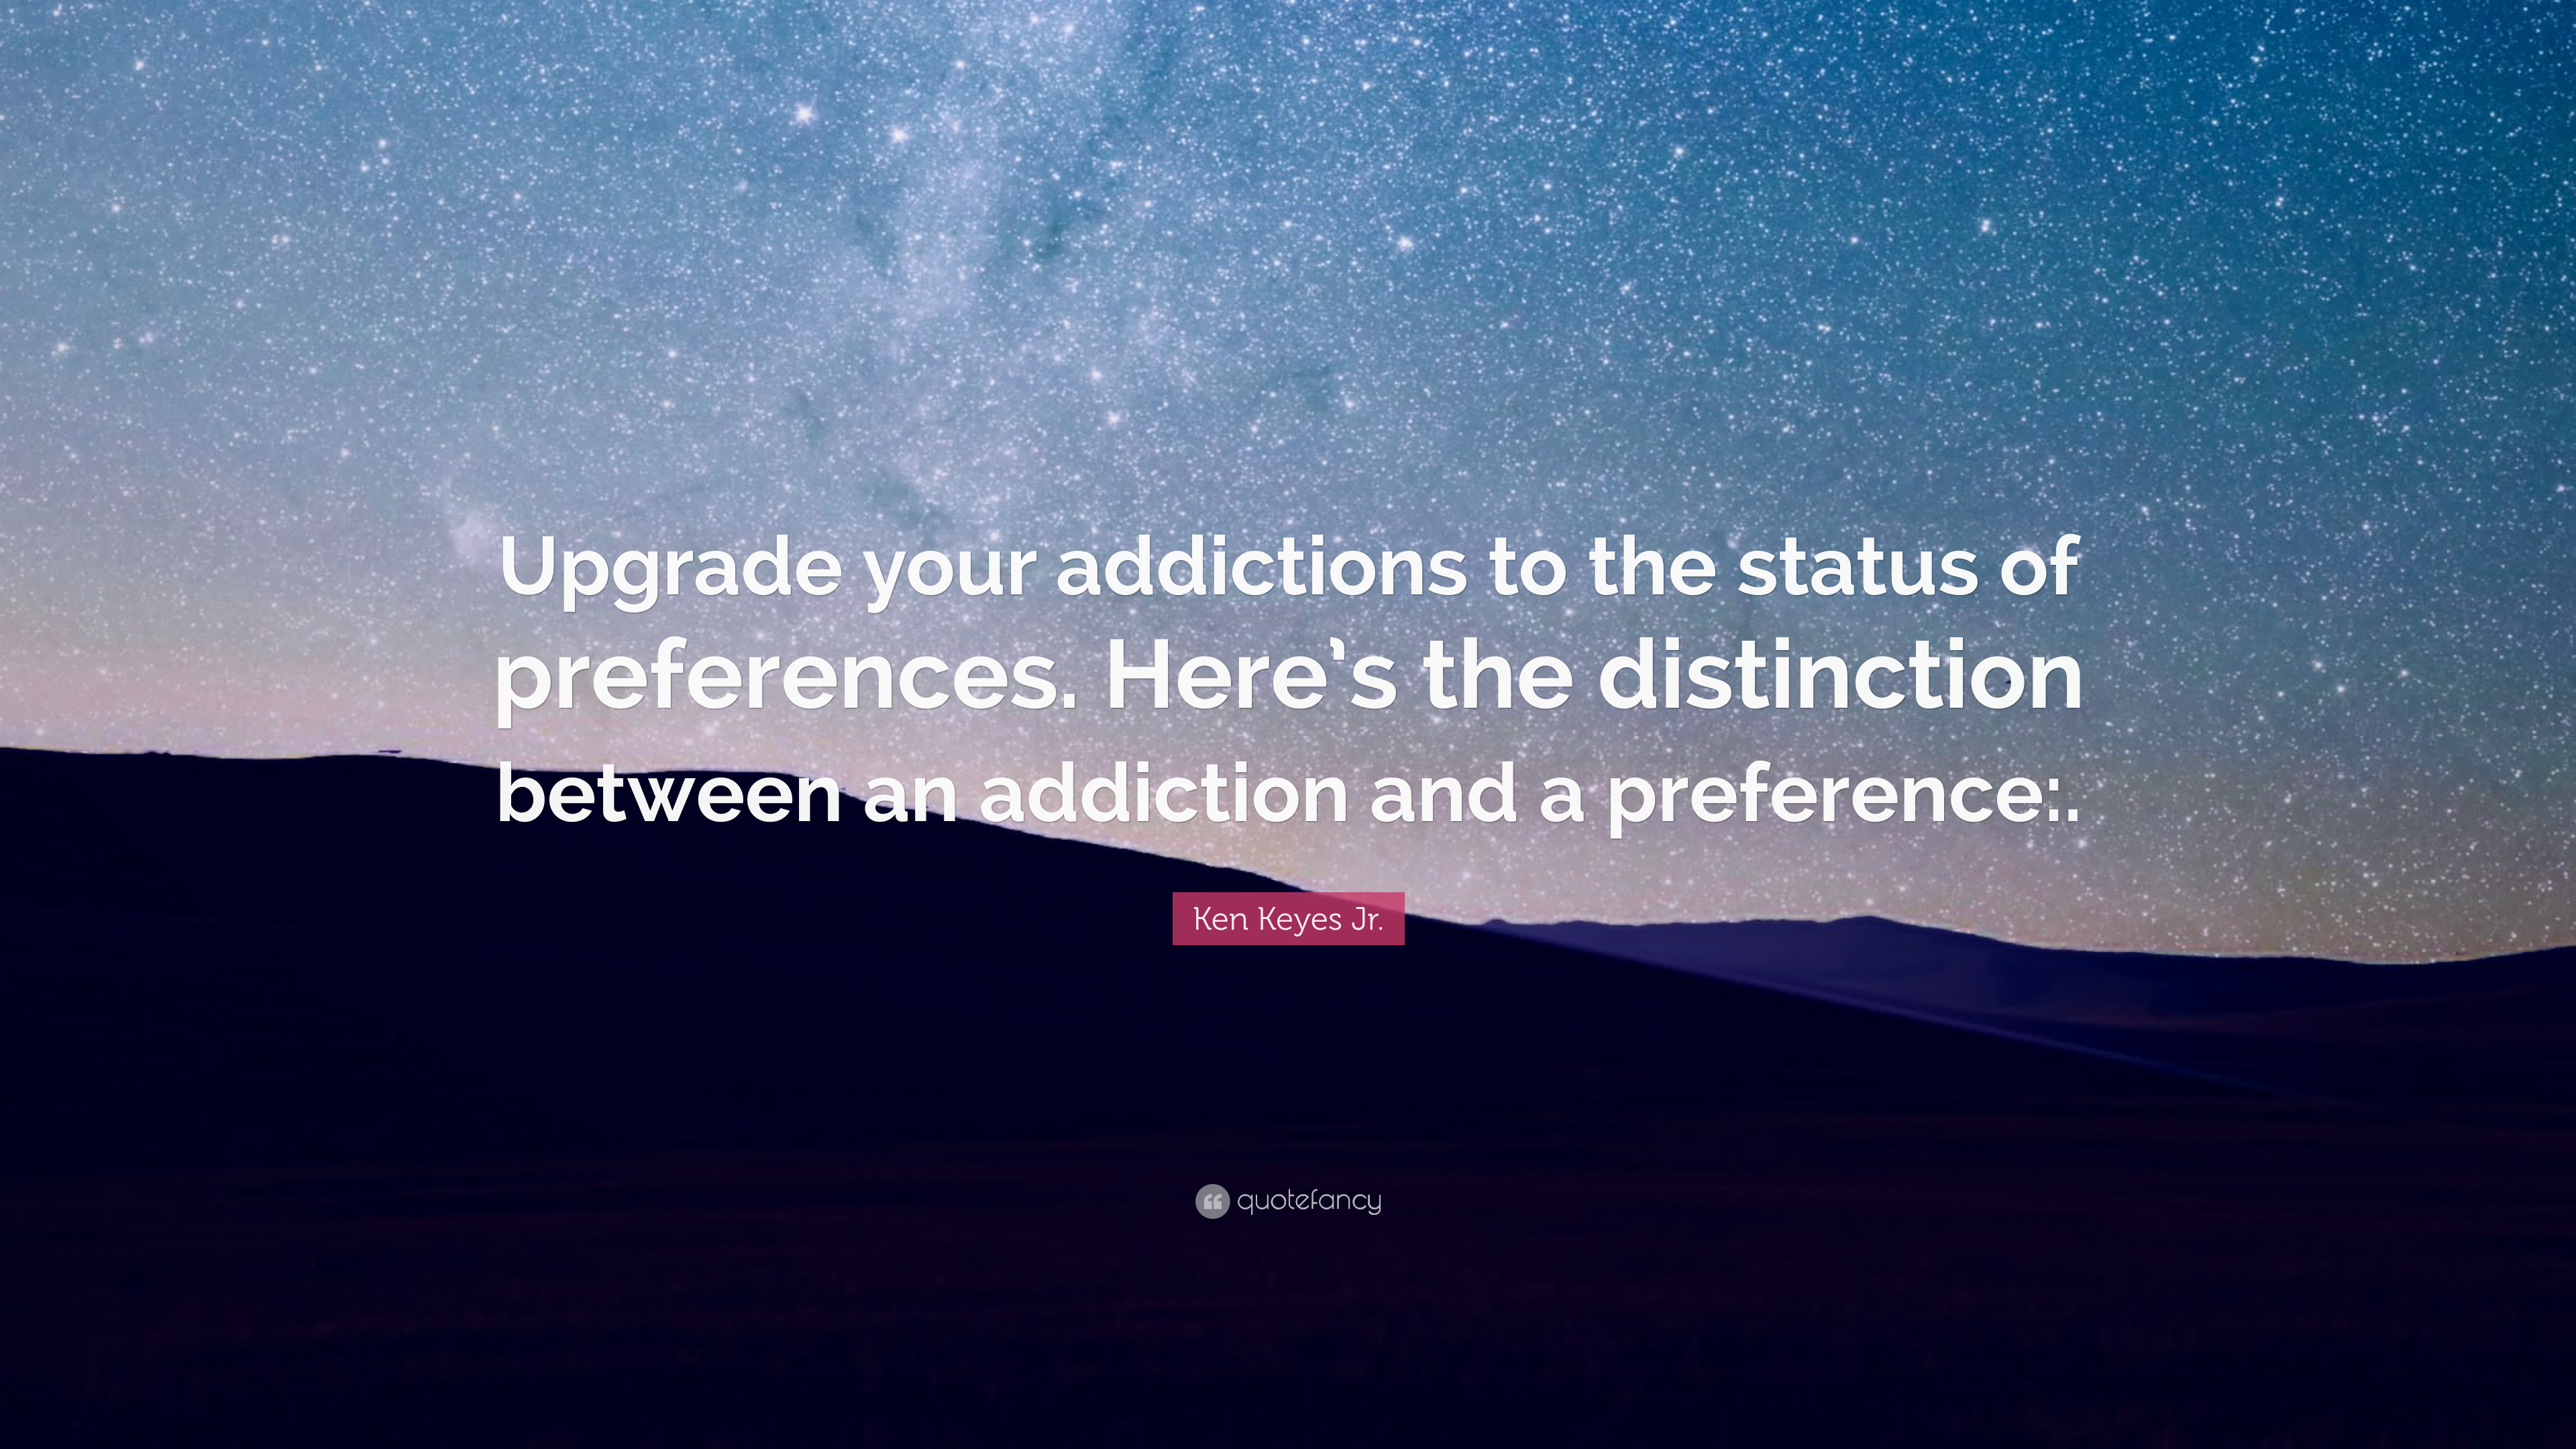 Ken Keyes Jr. Quote: “Upgrade your addictions to the status of